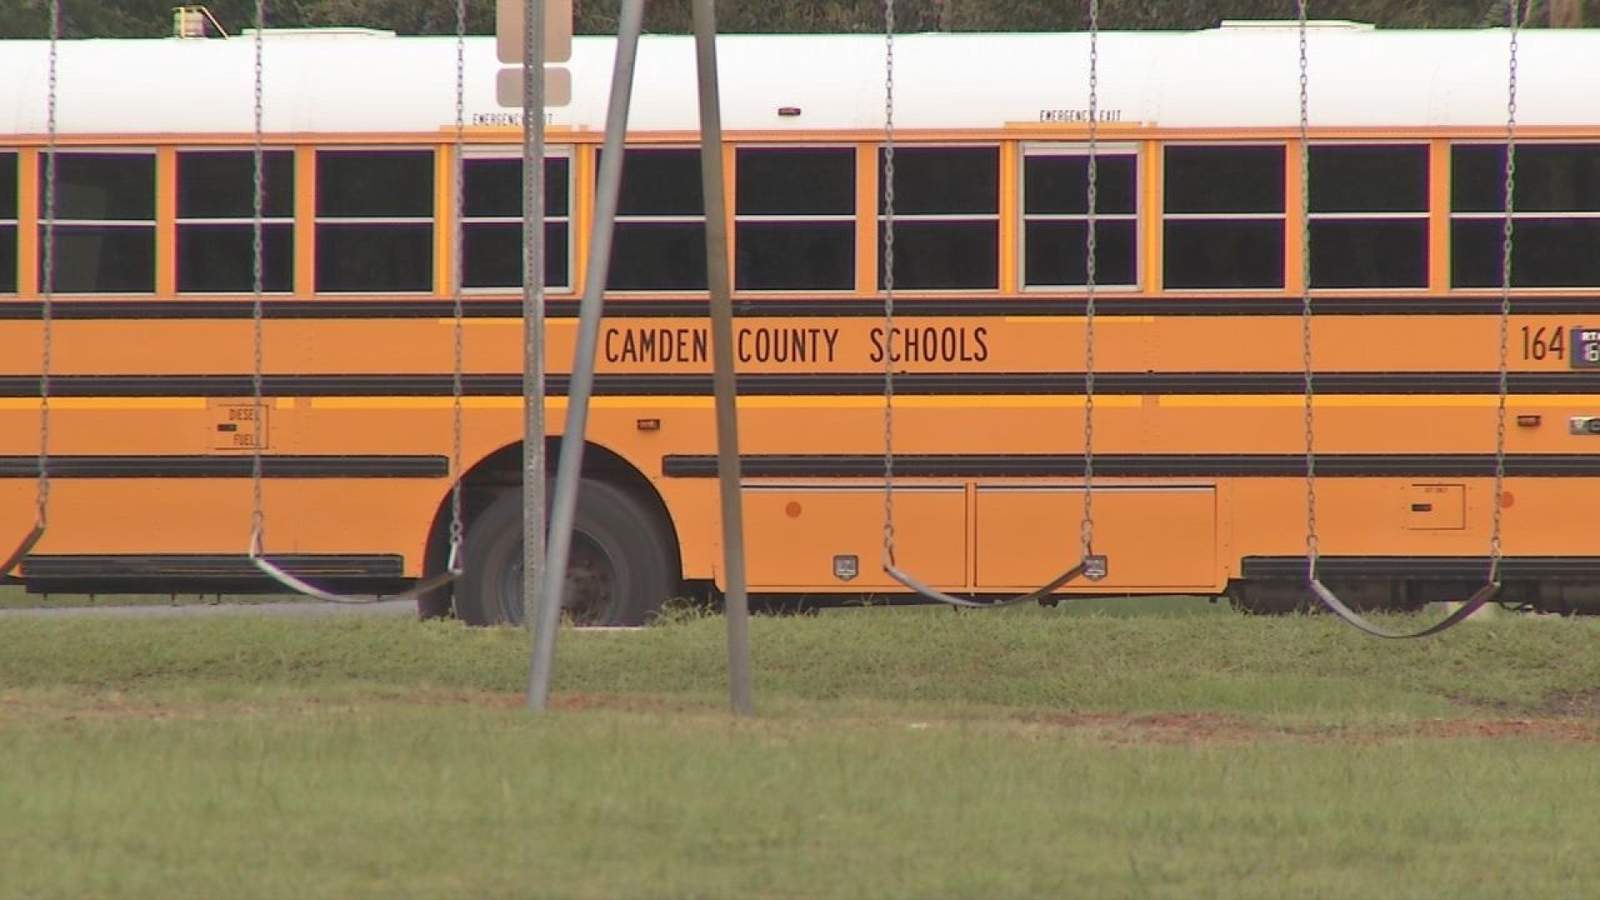 Parents of Camden County students concerned over lack of COVID-19 policy